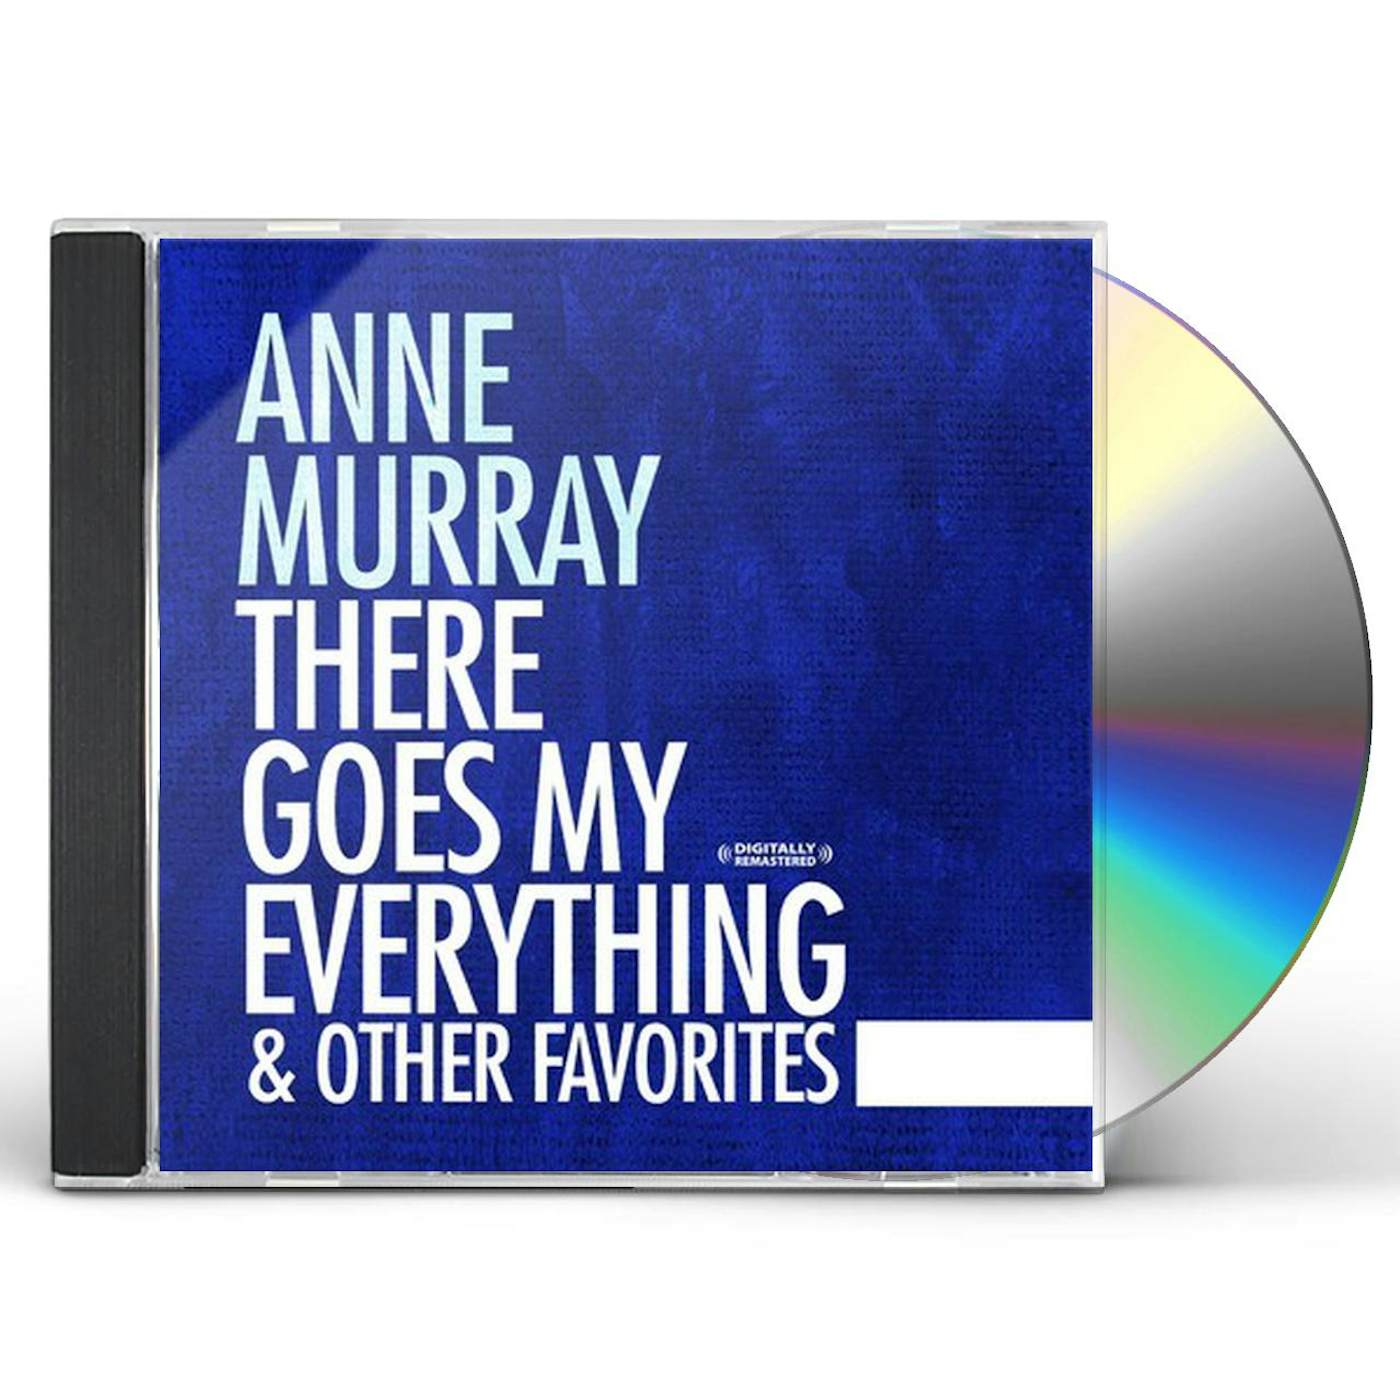 Anne Murray THERE GOES MY EVERYTHING & OTHER FAVORITES CD